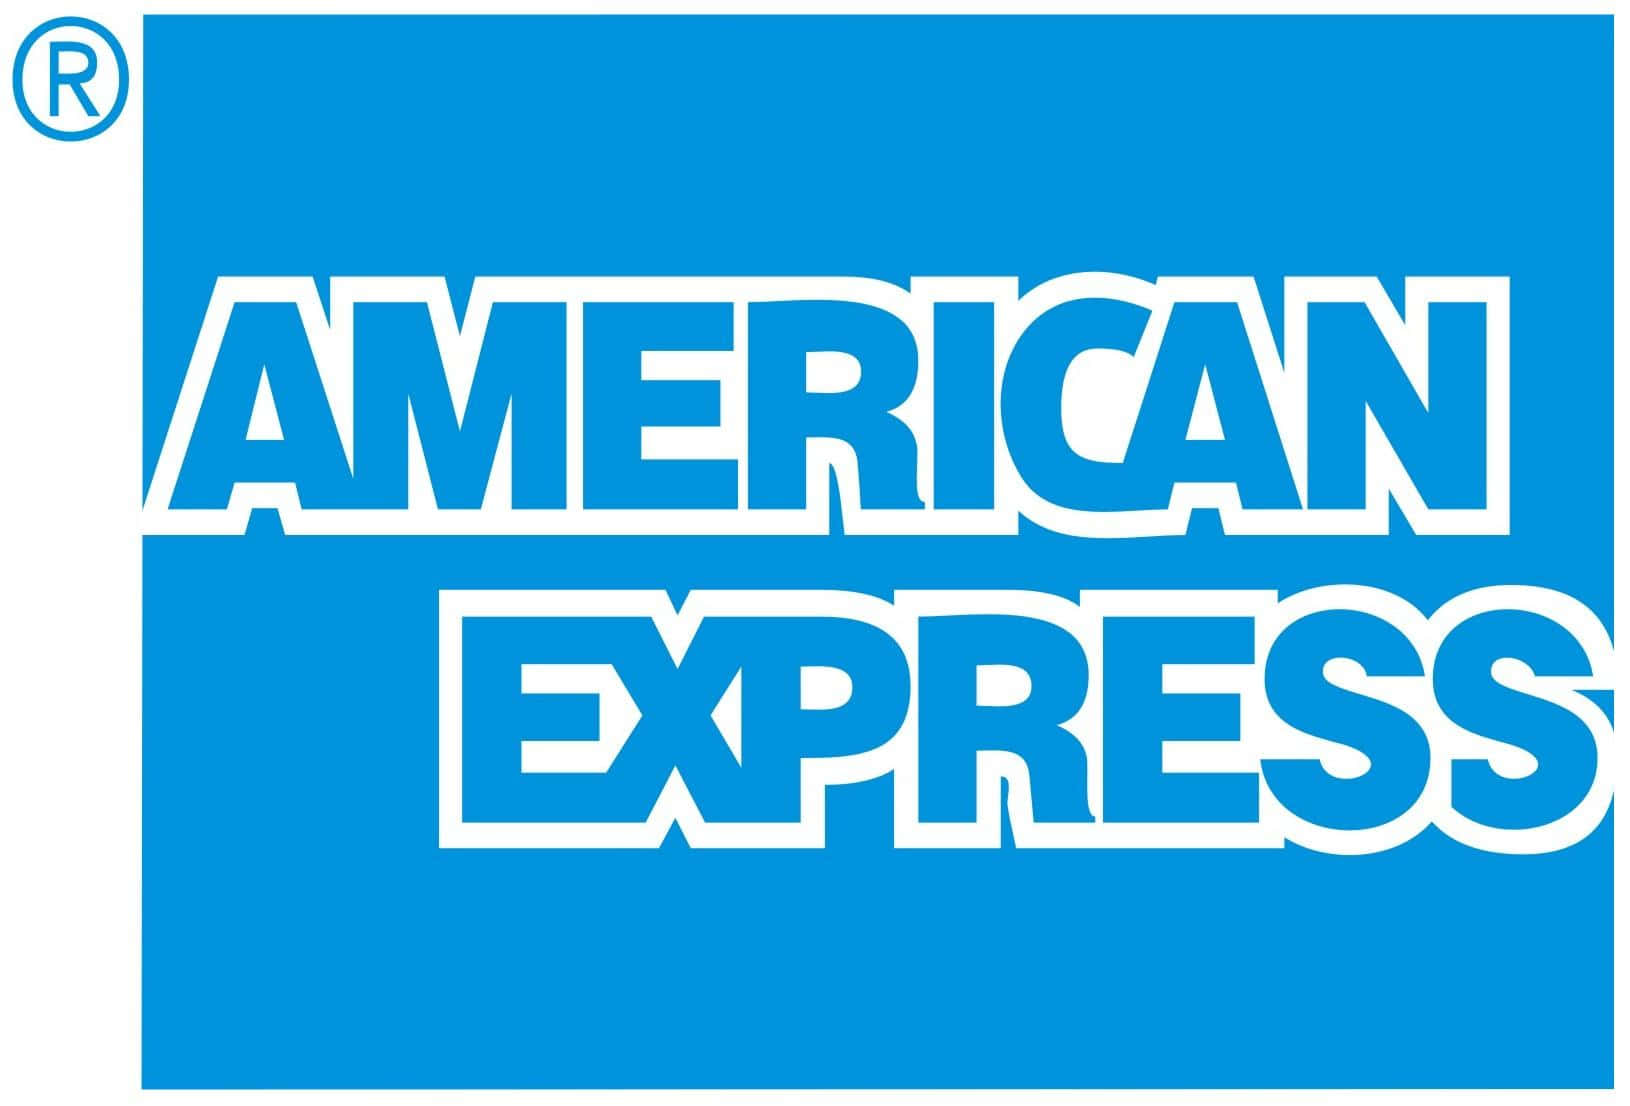 American Express - Your financial partner